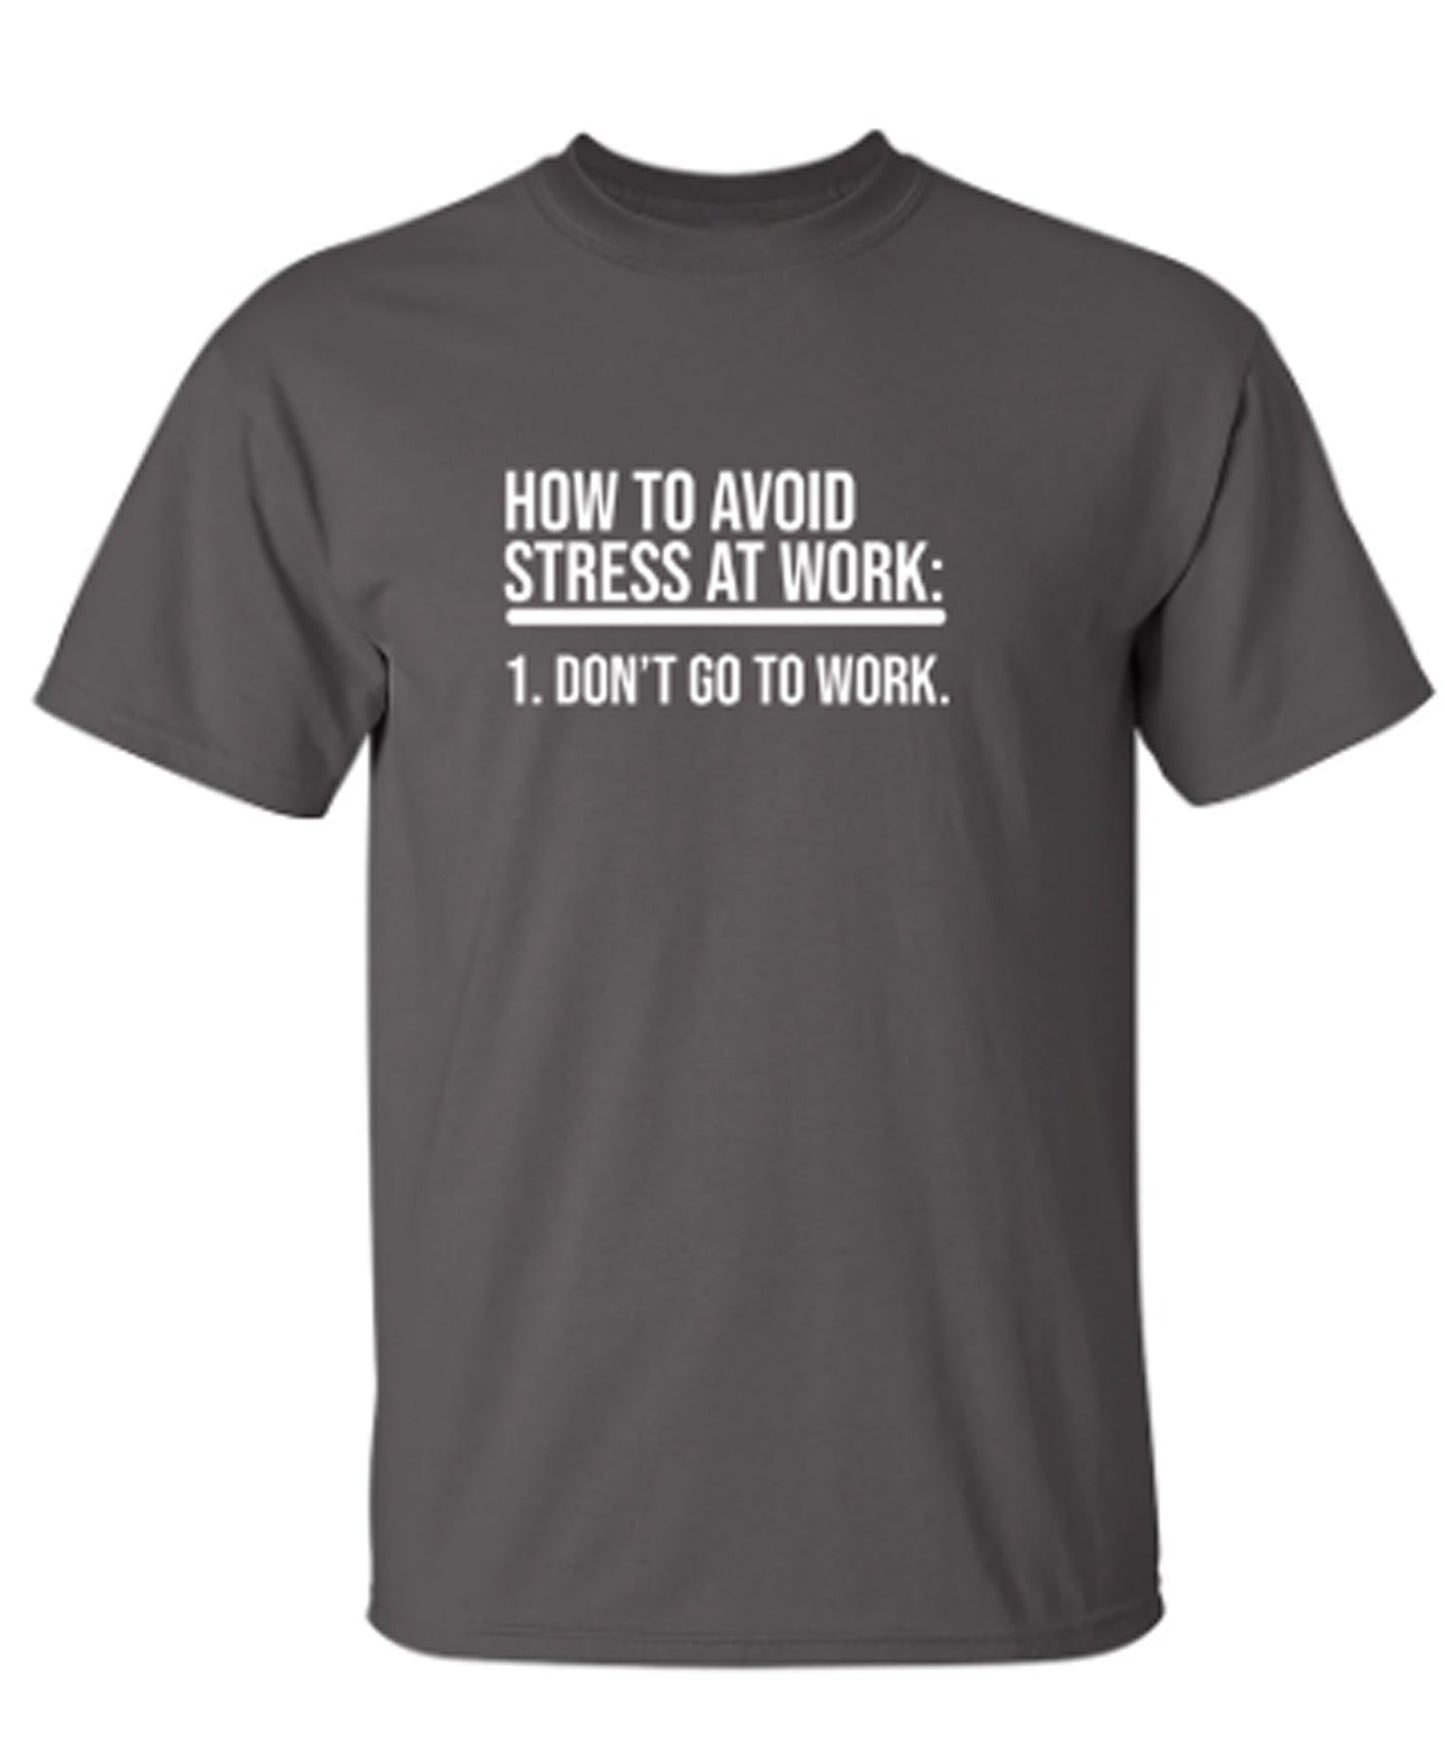 How To Avoid Stress At Work: Don't Go To Work - Funny T Shirts & Graphic Tees